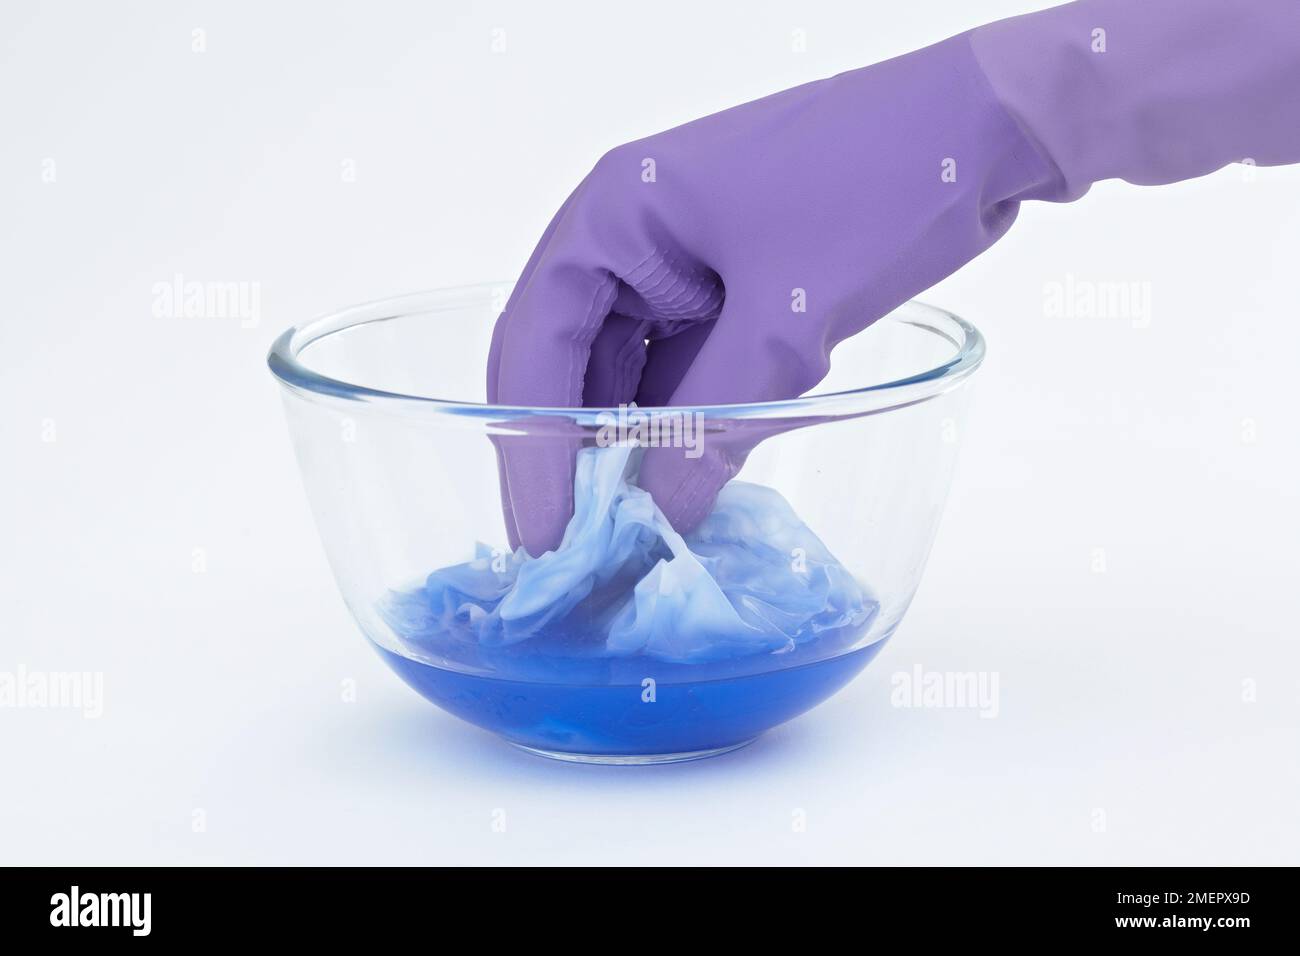 Wearing rubber gloves to dip silk in blue paint in water in glass bowl, close-up Stock Photo